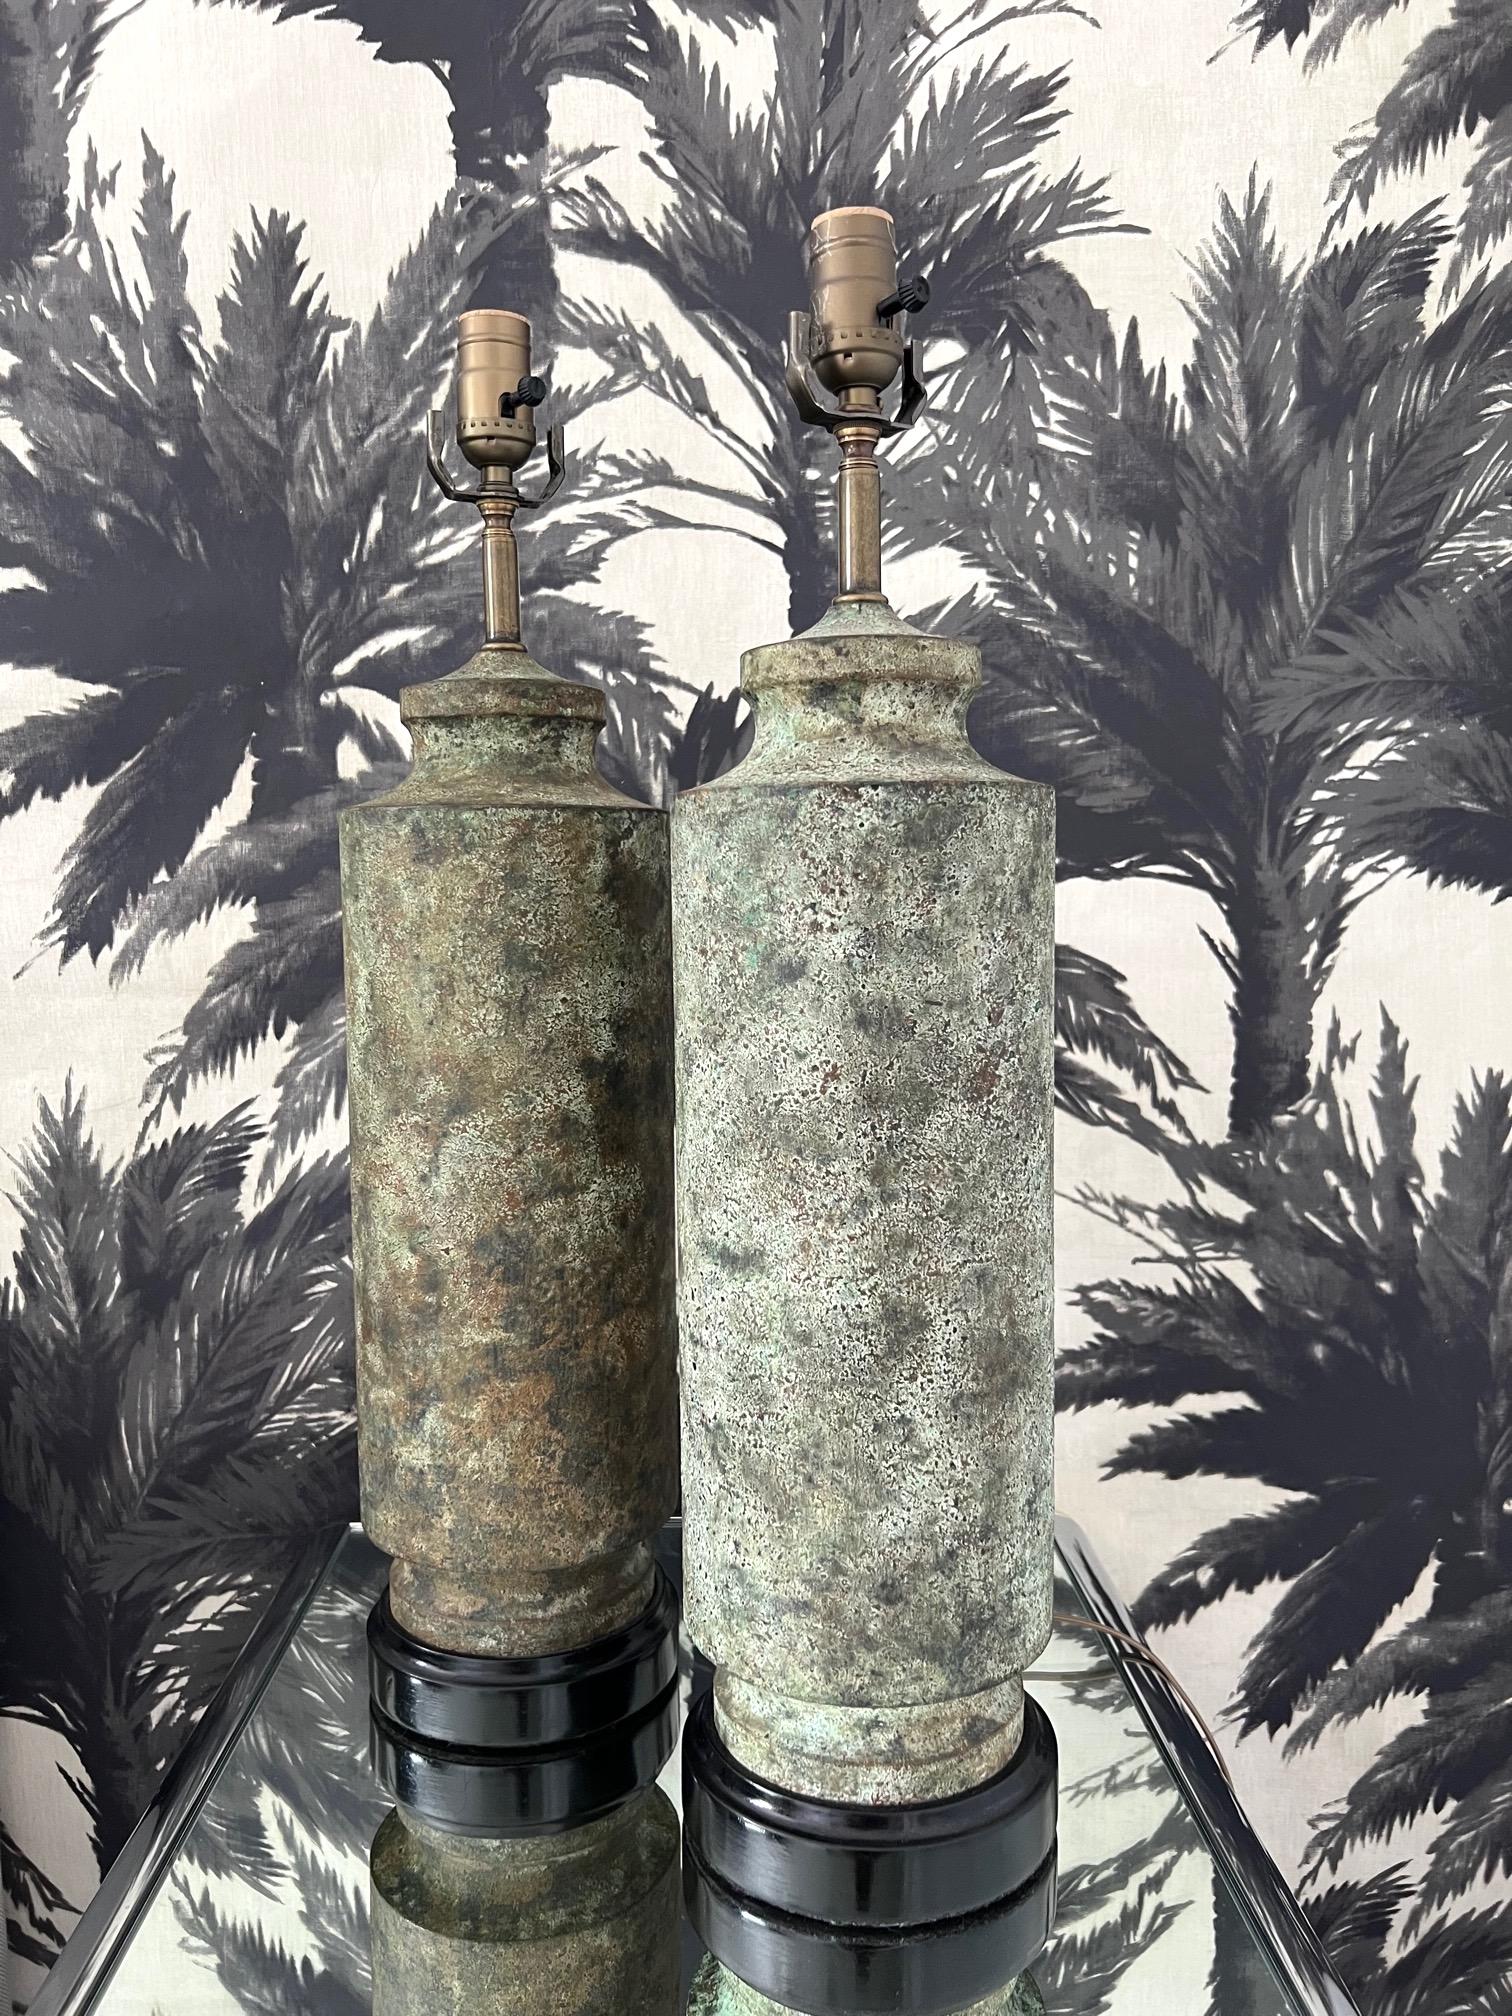 Metal Pair of Pagoda Column Lamps with Verdigris Finish and Ebony Bases, 1960s For Sale